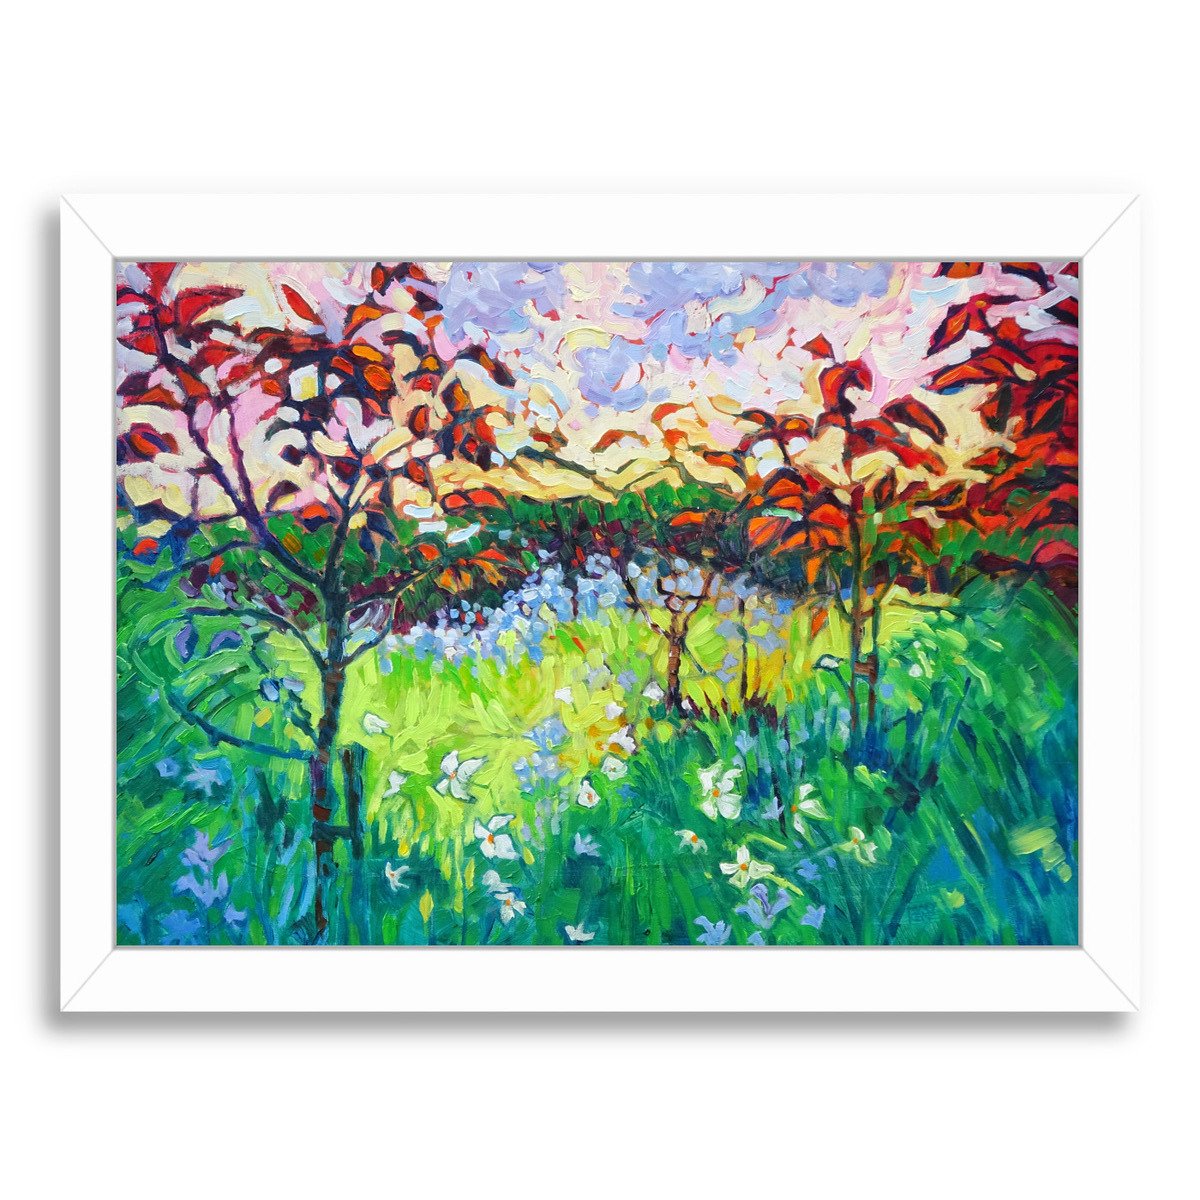 Garden At Houghton Hall By Mary Kemp - Framed Print - Americanflat